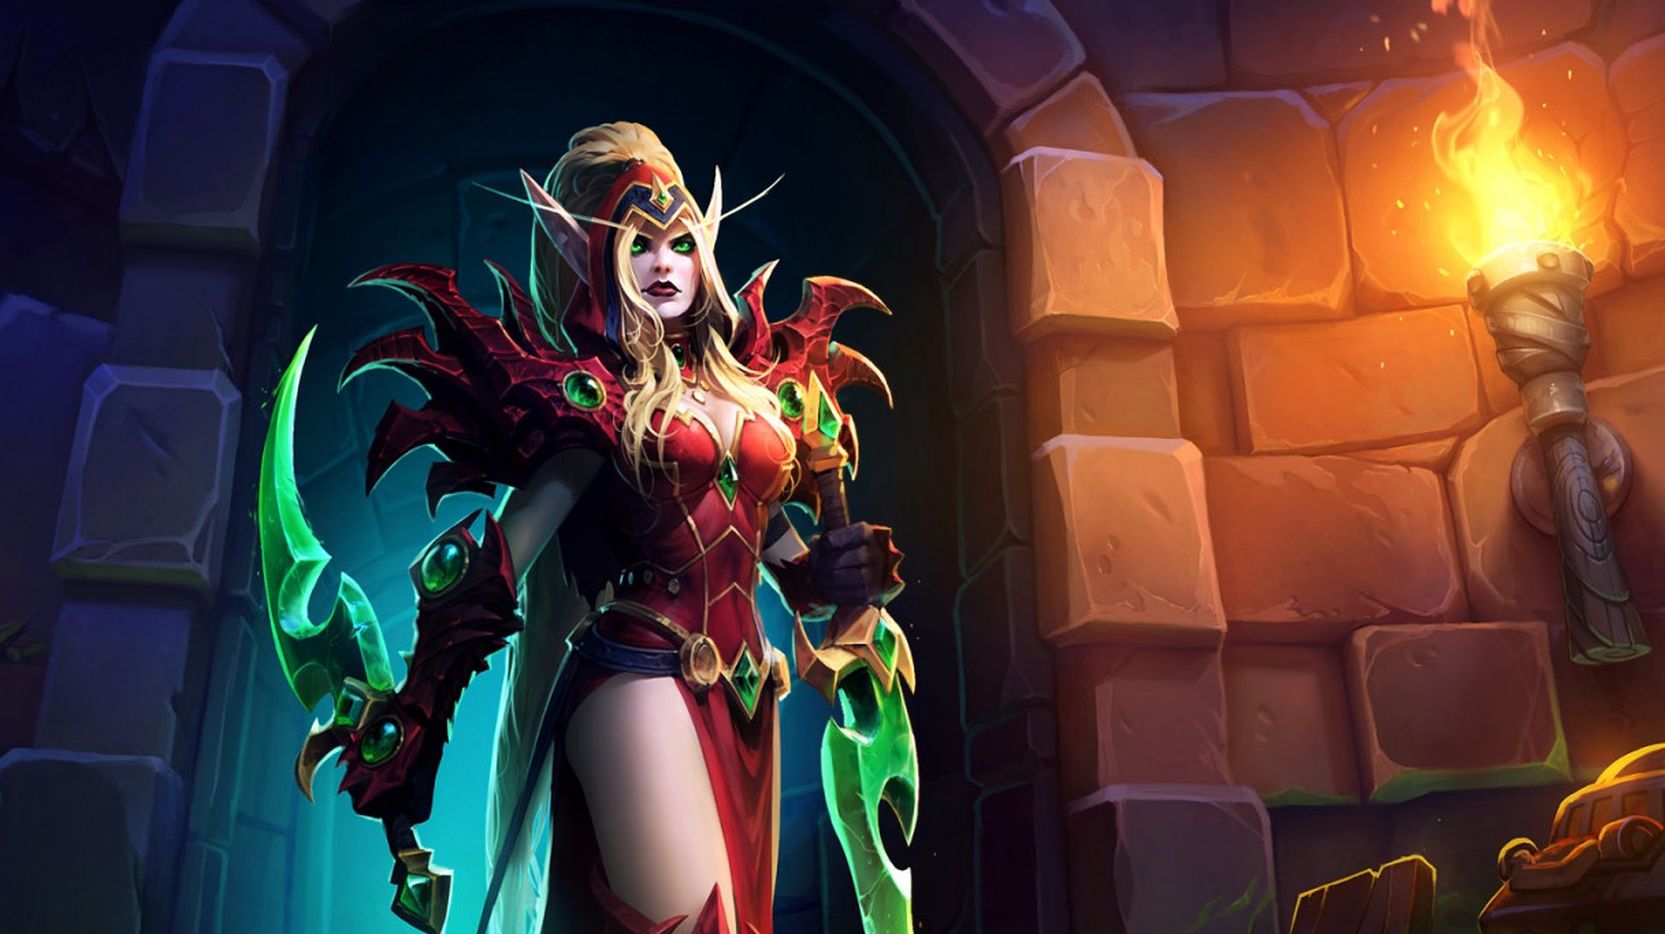 Image for Continued development on Heroes of the Storm has ceased